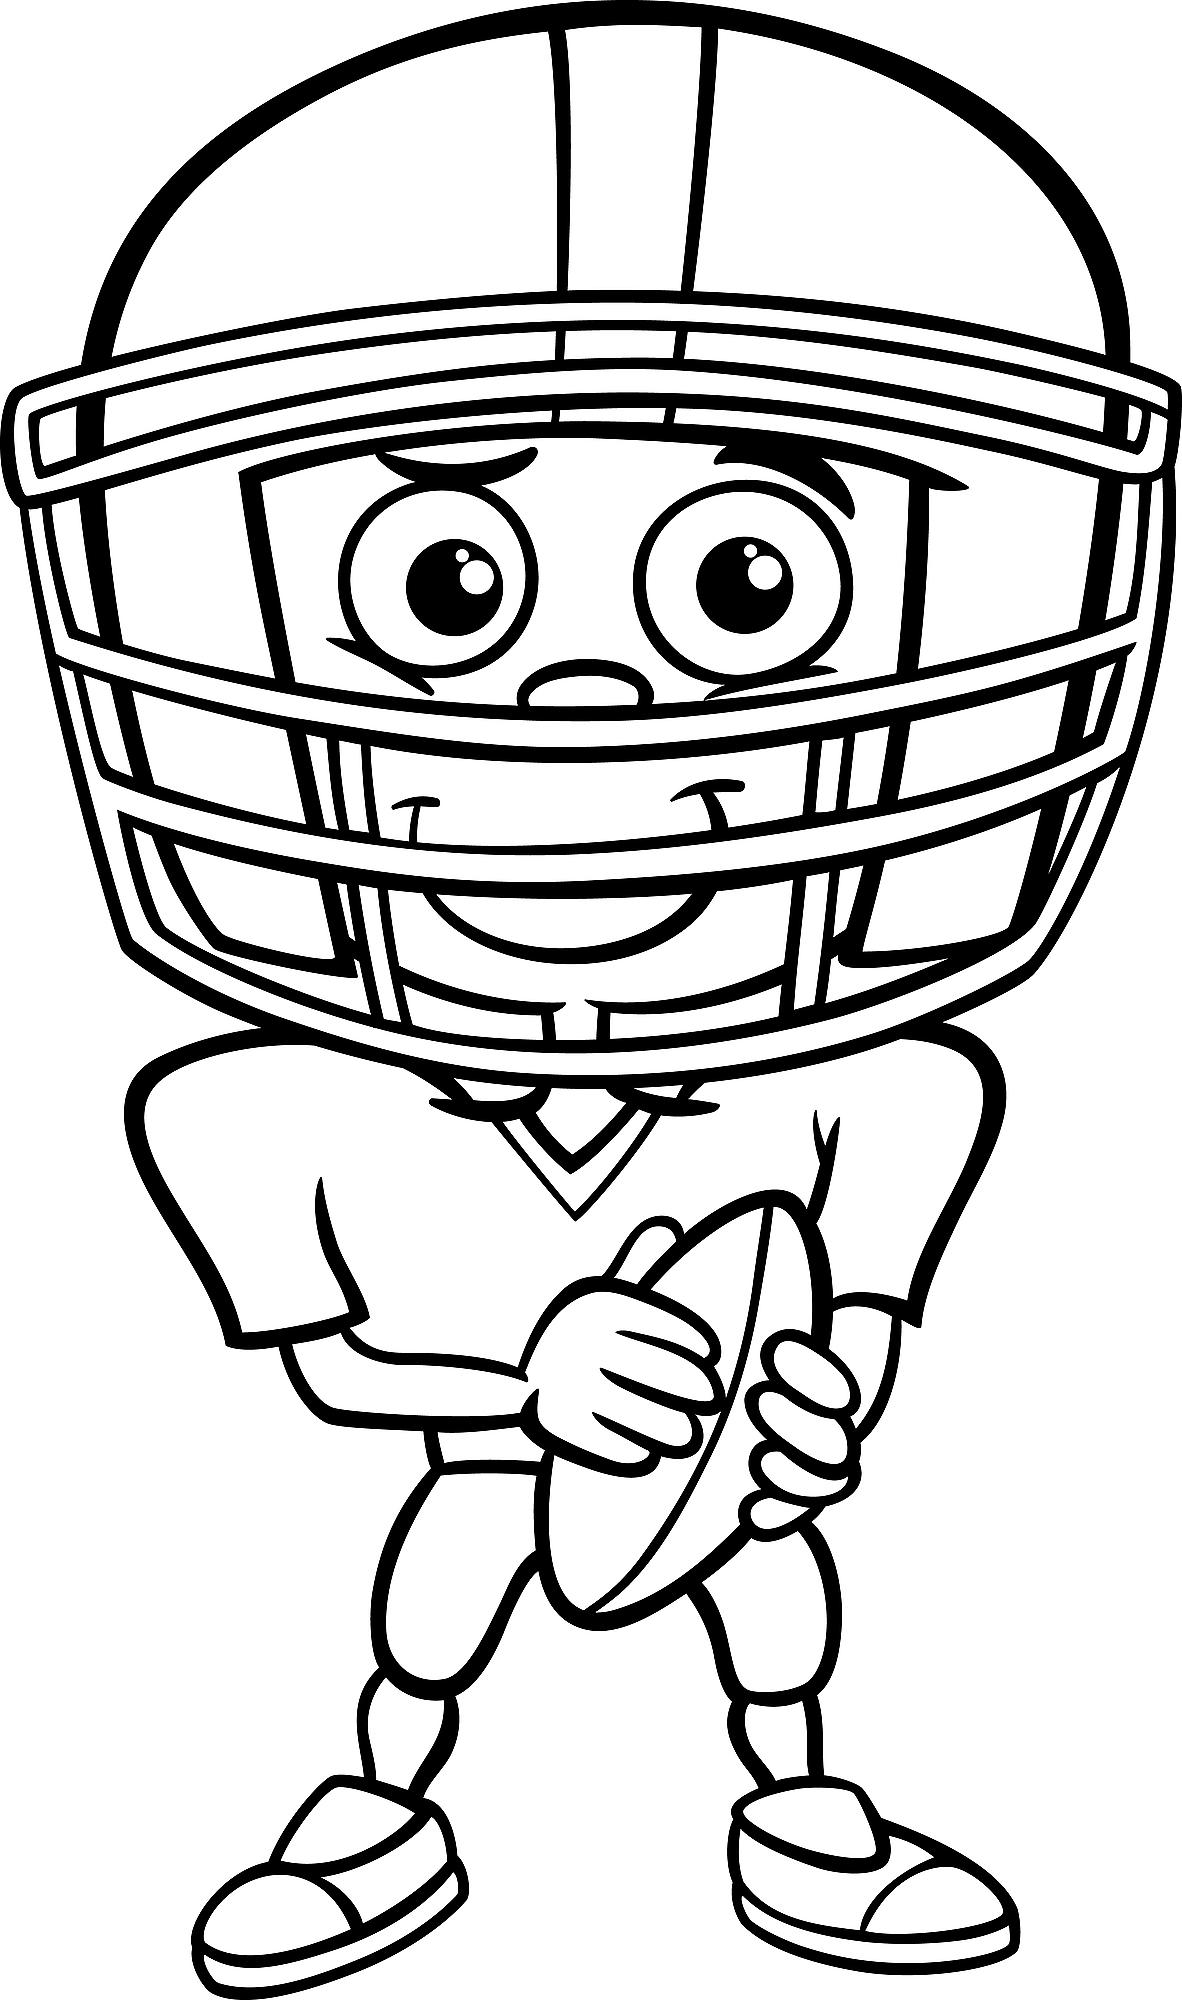 Football coloring pages printable sports coloring activity pages to entertain kids during the game printables mom